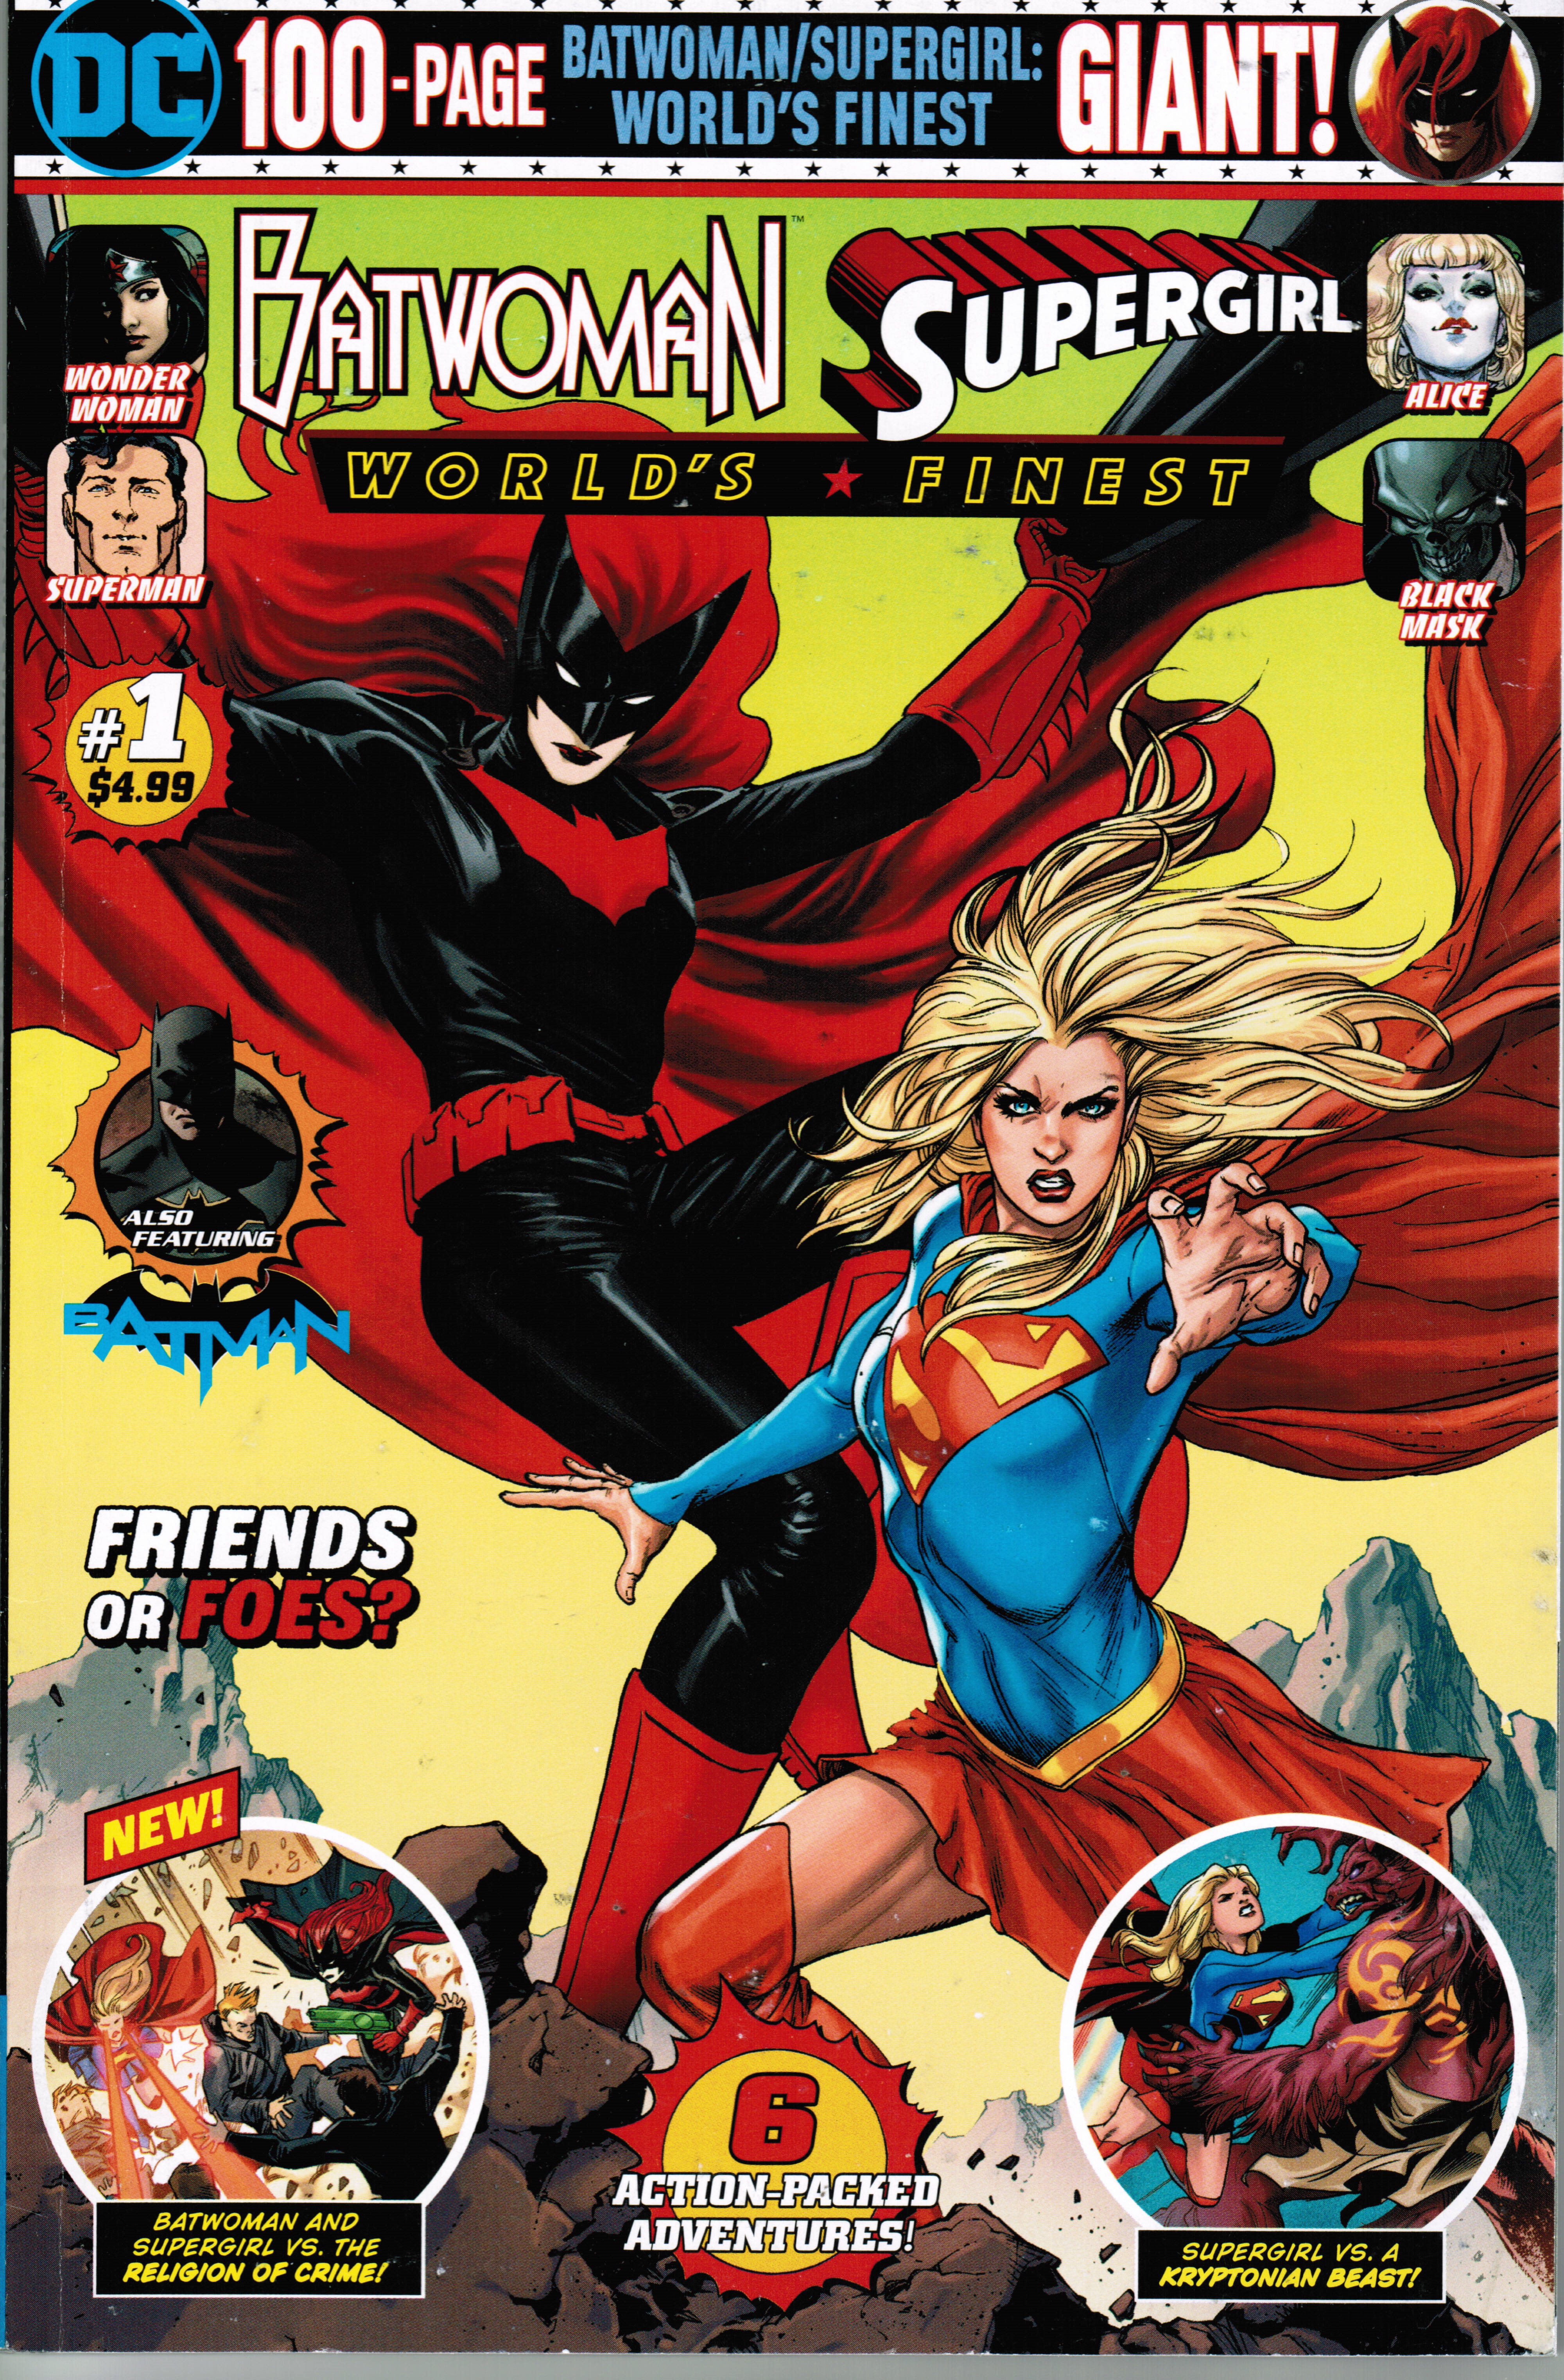 Batwoman/Supergirl: World's Finest Giant (2019): Chapter 1 - Page 2